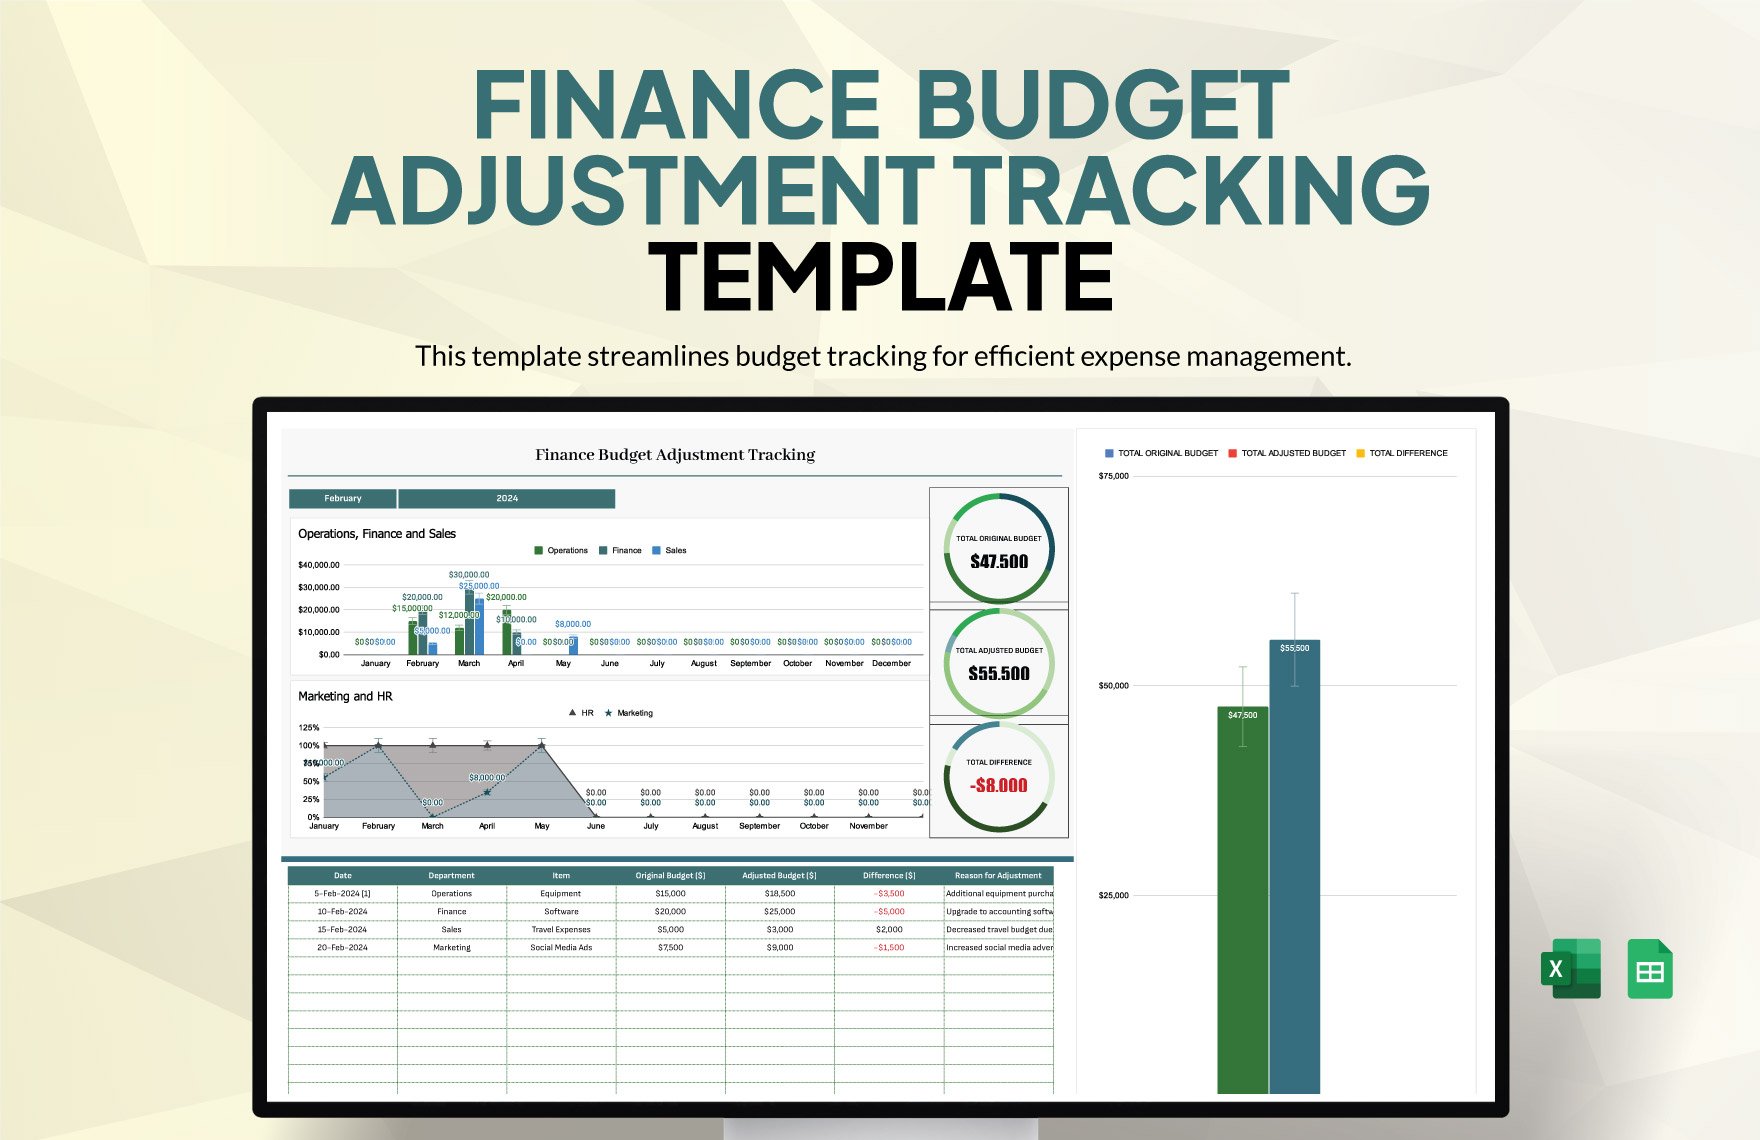 Finance Budget Adjustment Tracking Template in Excel, Google Sheets